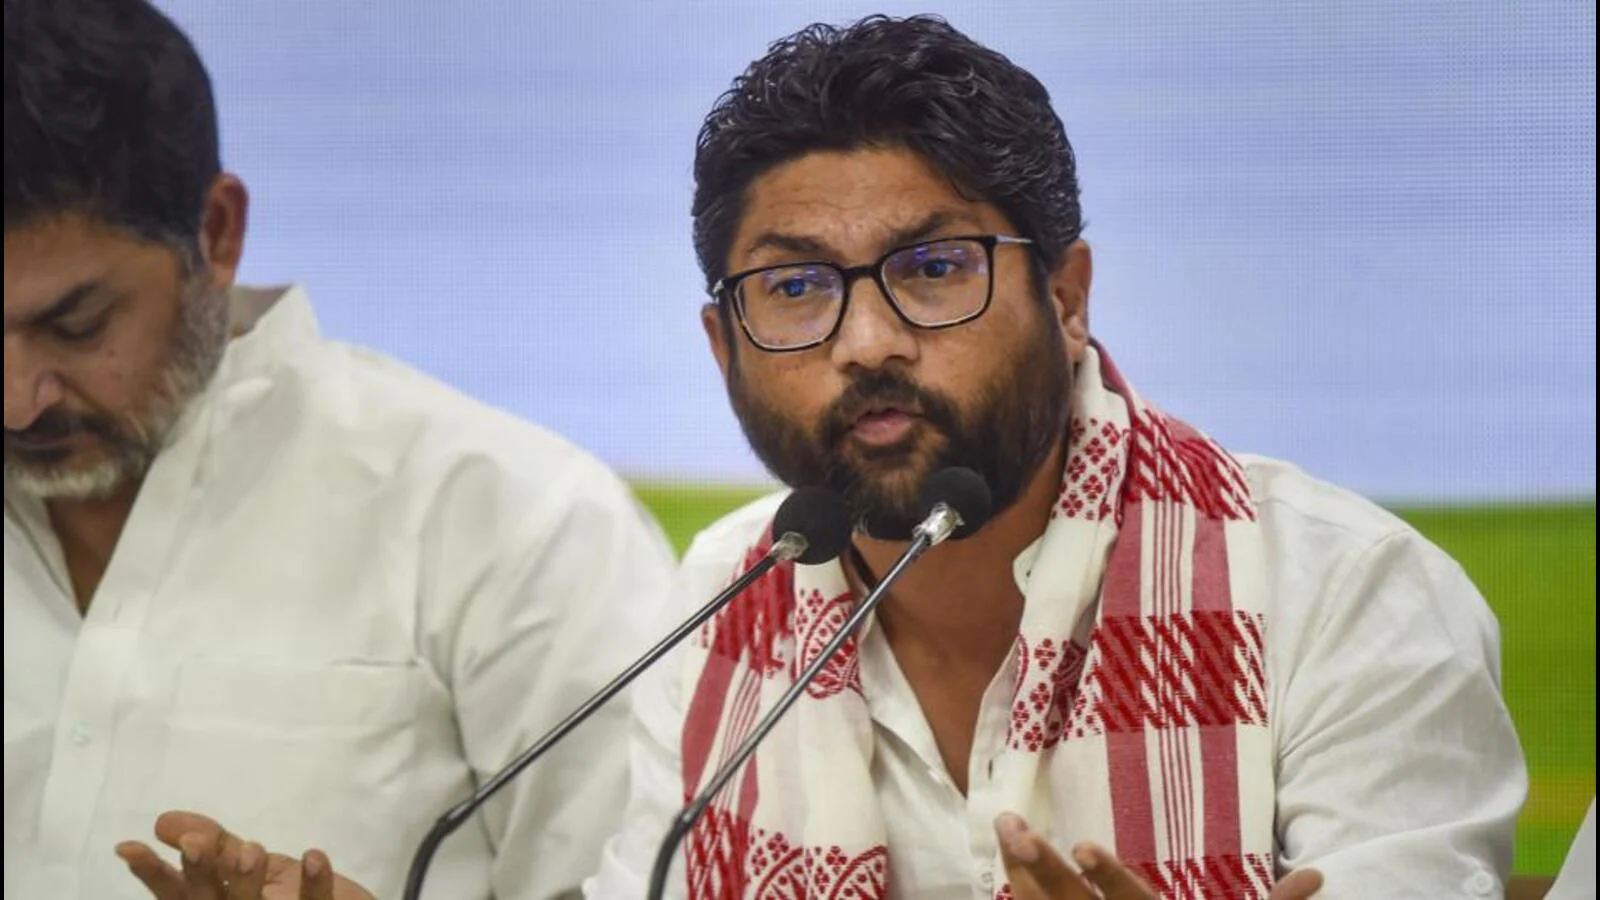 Gauhati HC stays lower court’s observations against Assam police in Mevani bail order